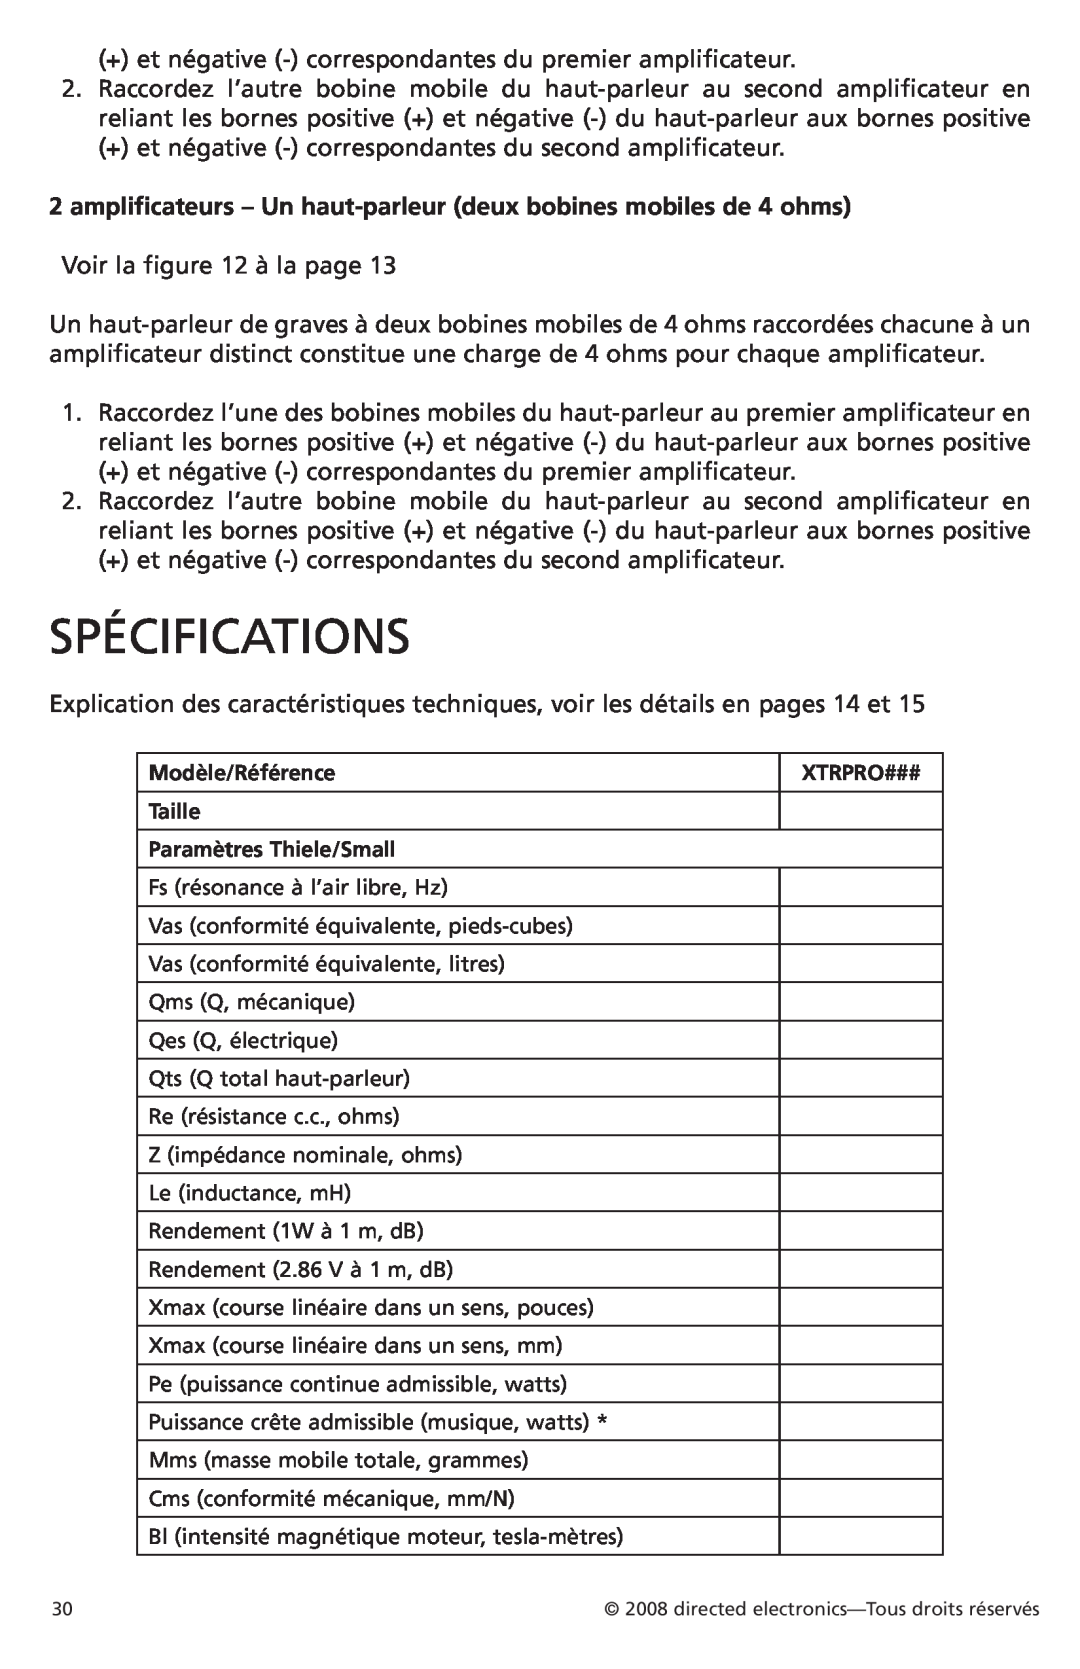 Orion Car Audio XTRPRO154, XTRPRO152, XTRPRO124, XTRPRO102, XTRPRO122, XTRPRO104 owner manual Spécifications 